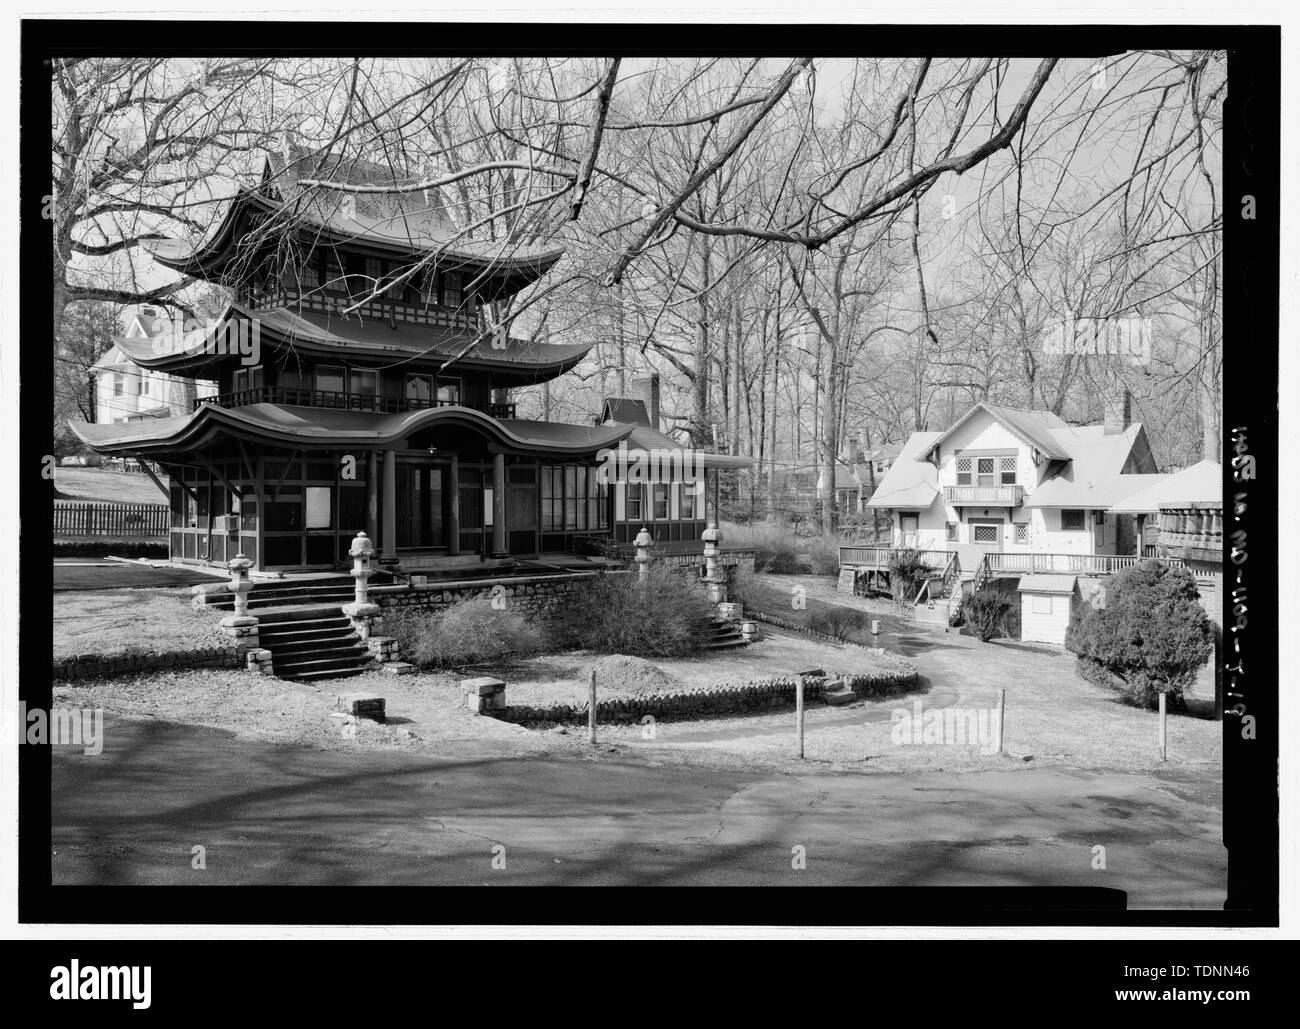 Perspective view looking from the east to the east northeast facade, with Swiss Chalet in background, to replicate the view shown in MD-1109-J-18 - National Park Seminary, Japanese Pagoda, 2805 Linden Lane, Silver Spring, Montgomery County, MD; Chi Psi Epsilon sorority; Price, Virginia B, transmitter; Ott, Cynthia, historian; Boucher, Jack E, photographer; Price, Virginia B, transmitter; Lavoie, Catherine C, project manager Stock Photo